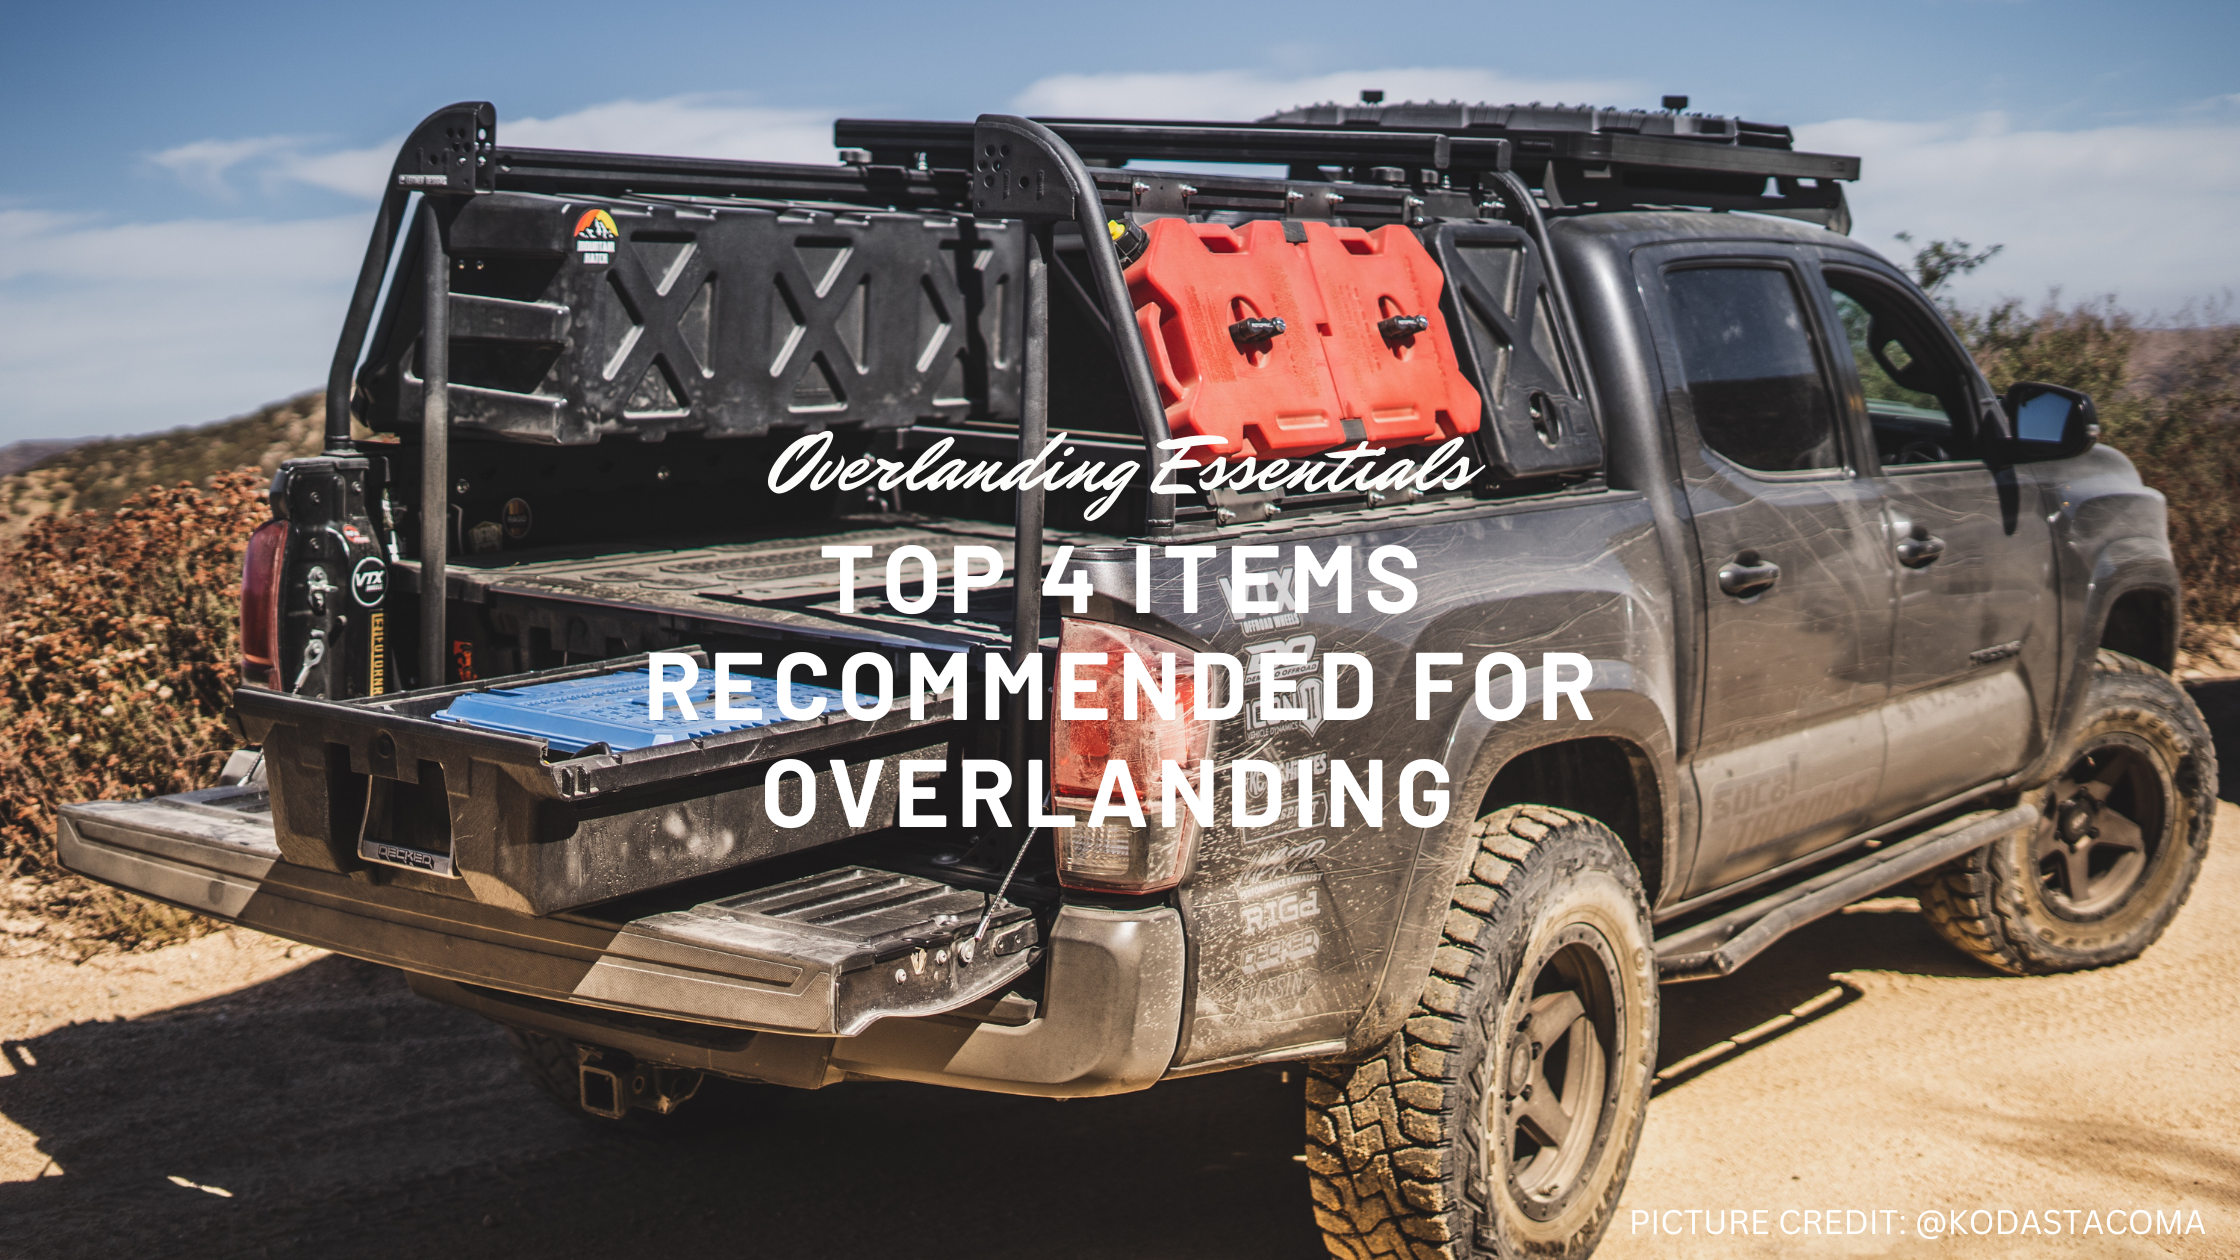 Top 4 items recommended for Overlanding